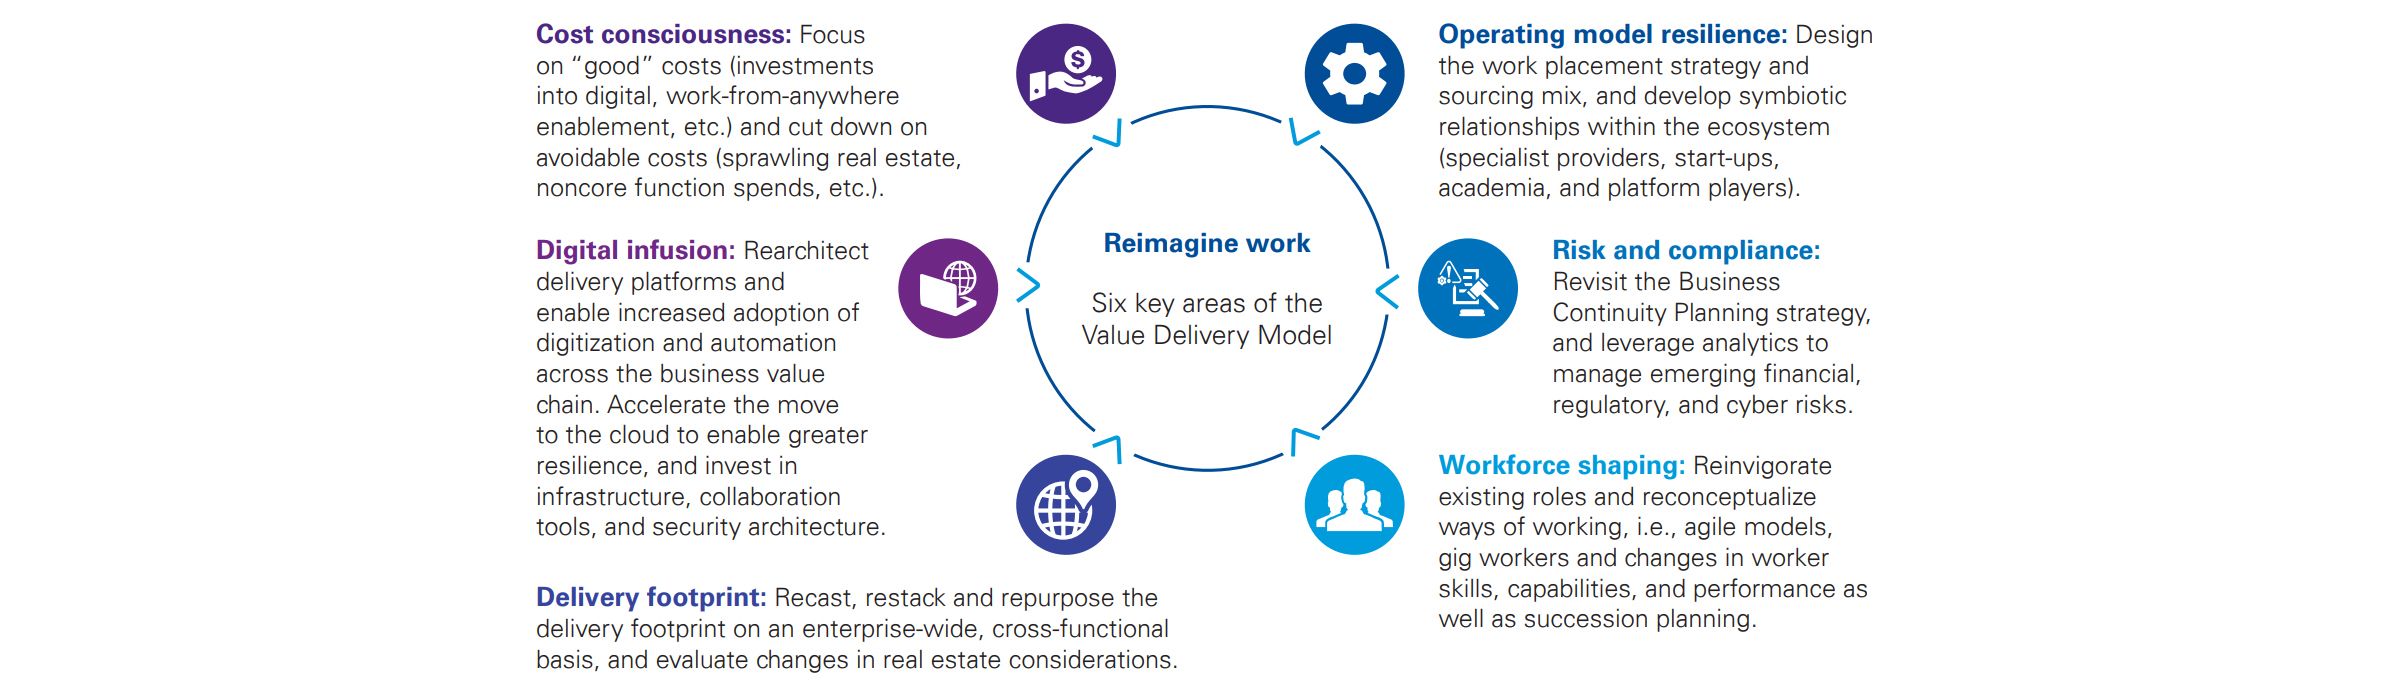 Reimagine work: Six key areas of the Value Delivery Model